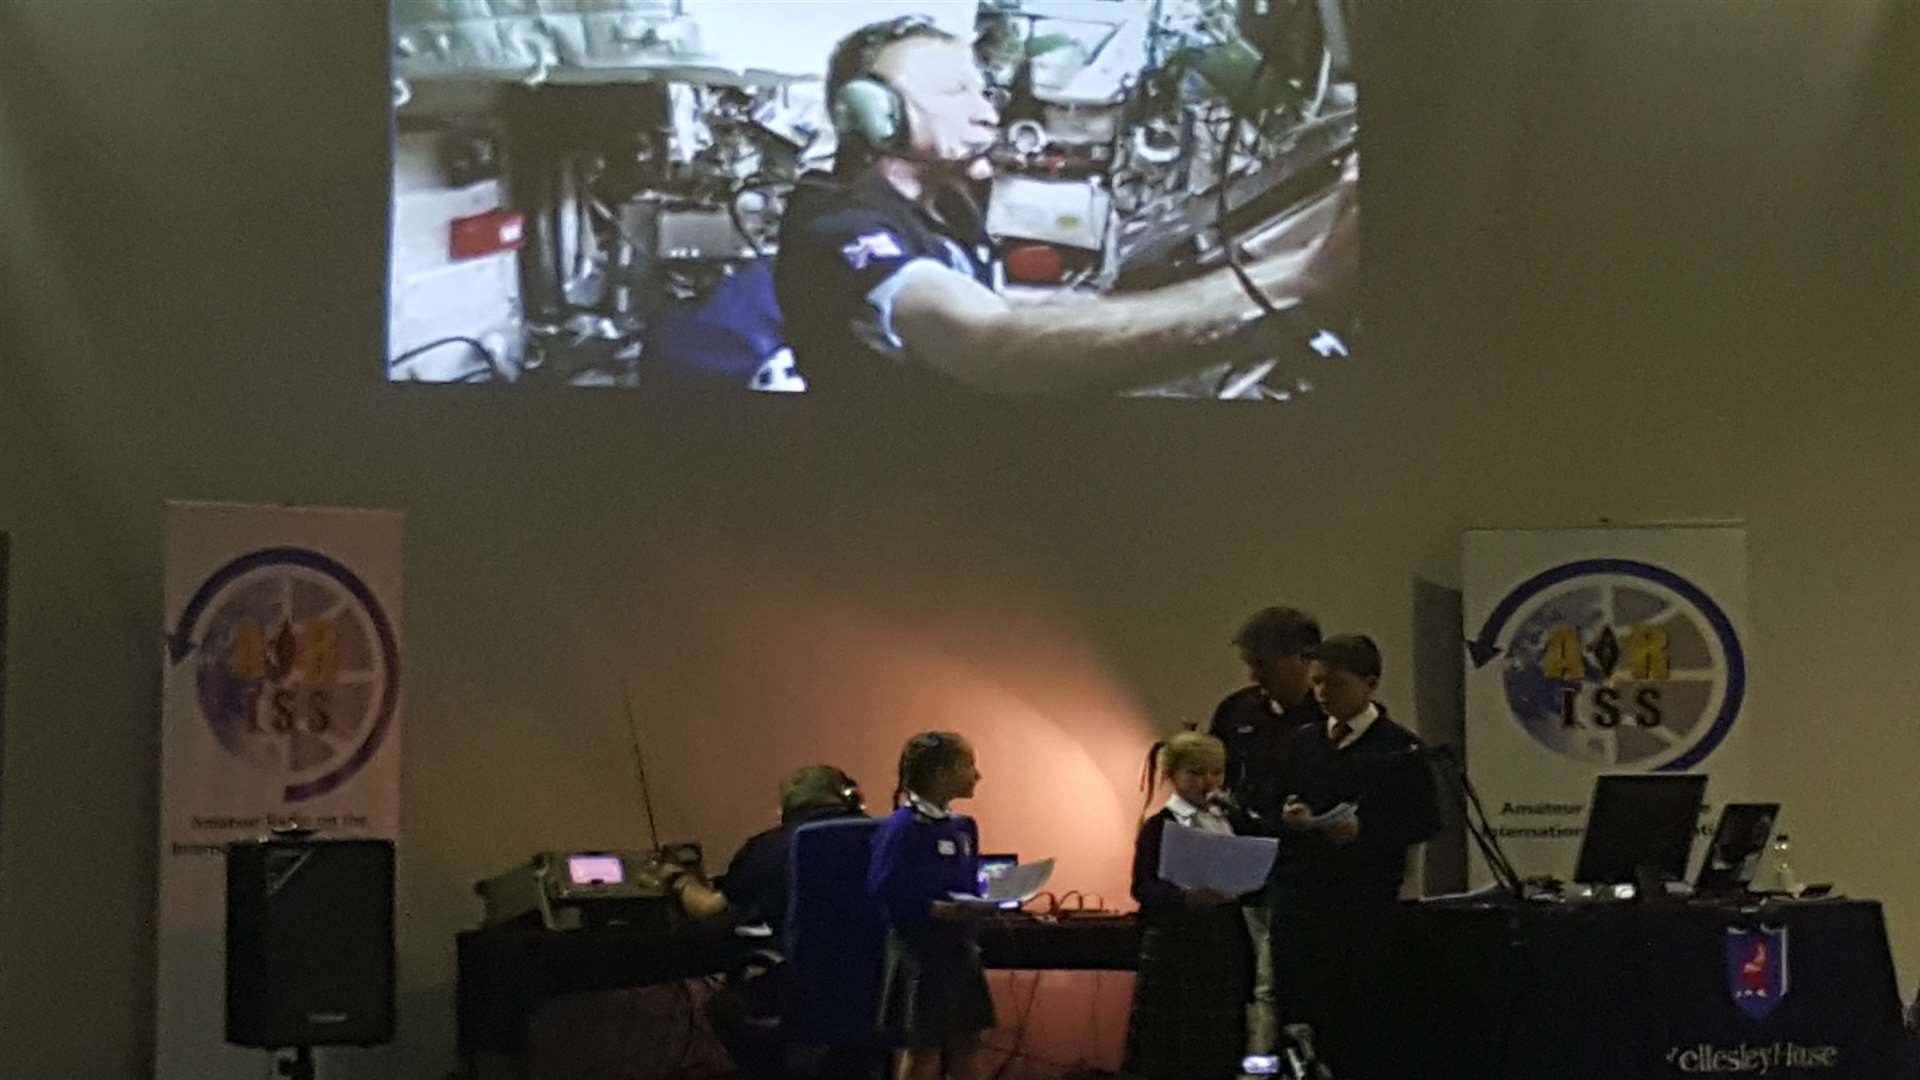 There were a few issues with contacting the ISS 400km above the earth but pupils did manage to get some good answers from Tim Peake